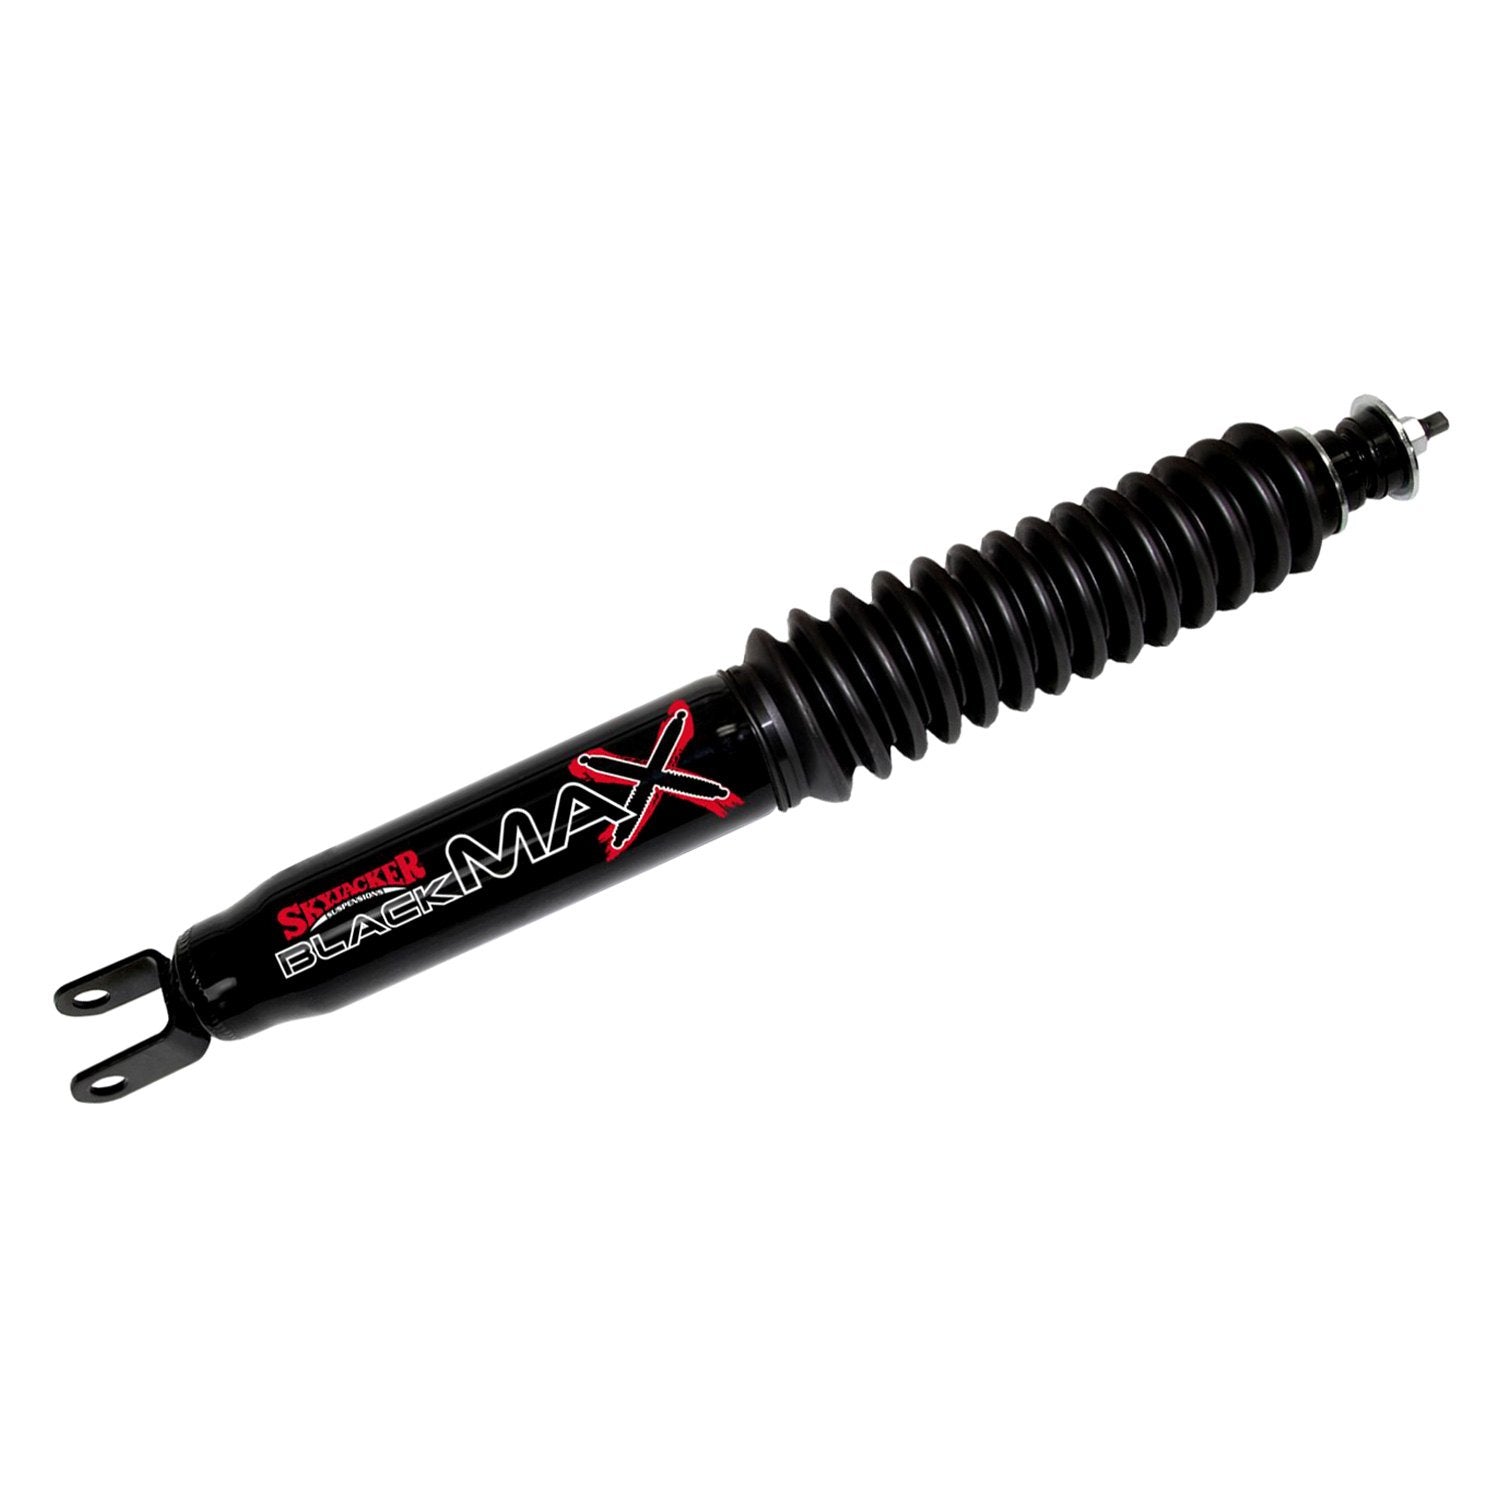 Skyjacker 5-6" Black Max Front Shock Absorber For 1999-2007 Chevy/GMC - B8596